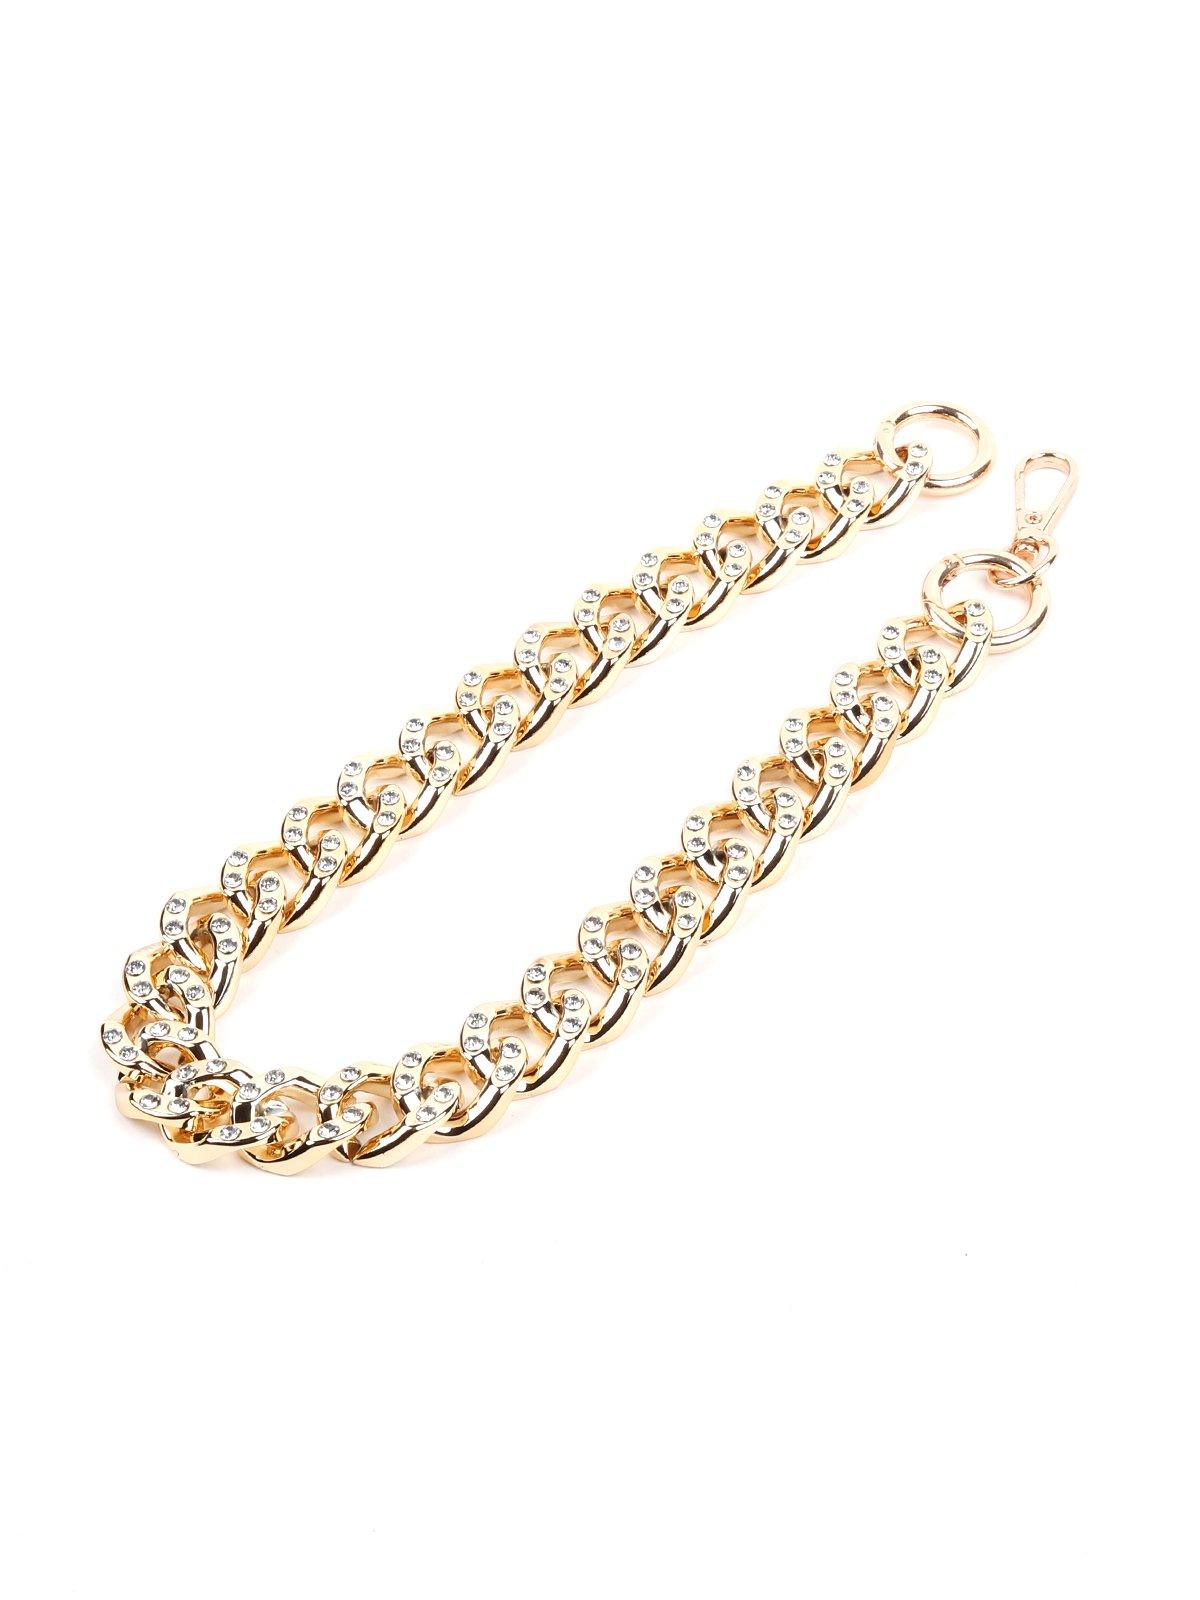 Gold Chunky Interlinked Chain Necklace - Odette